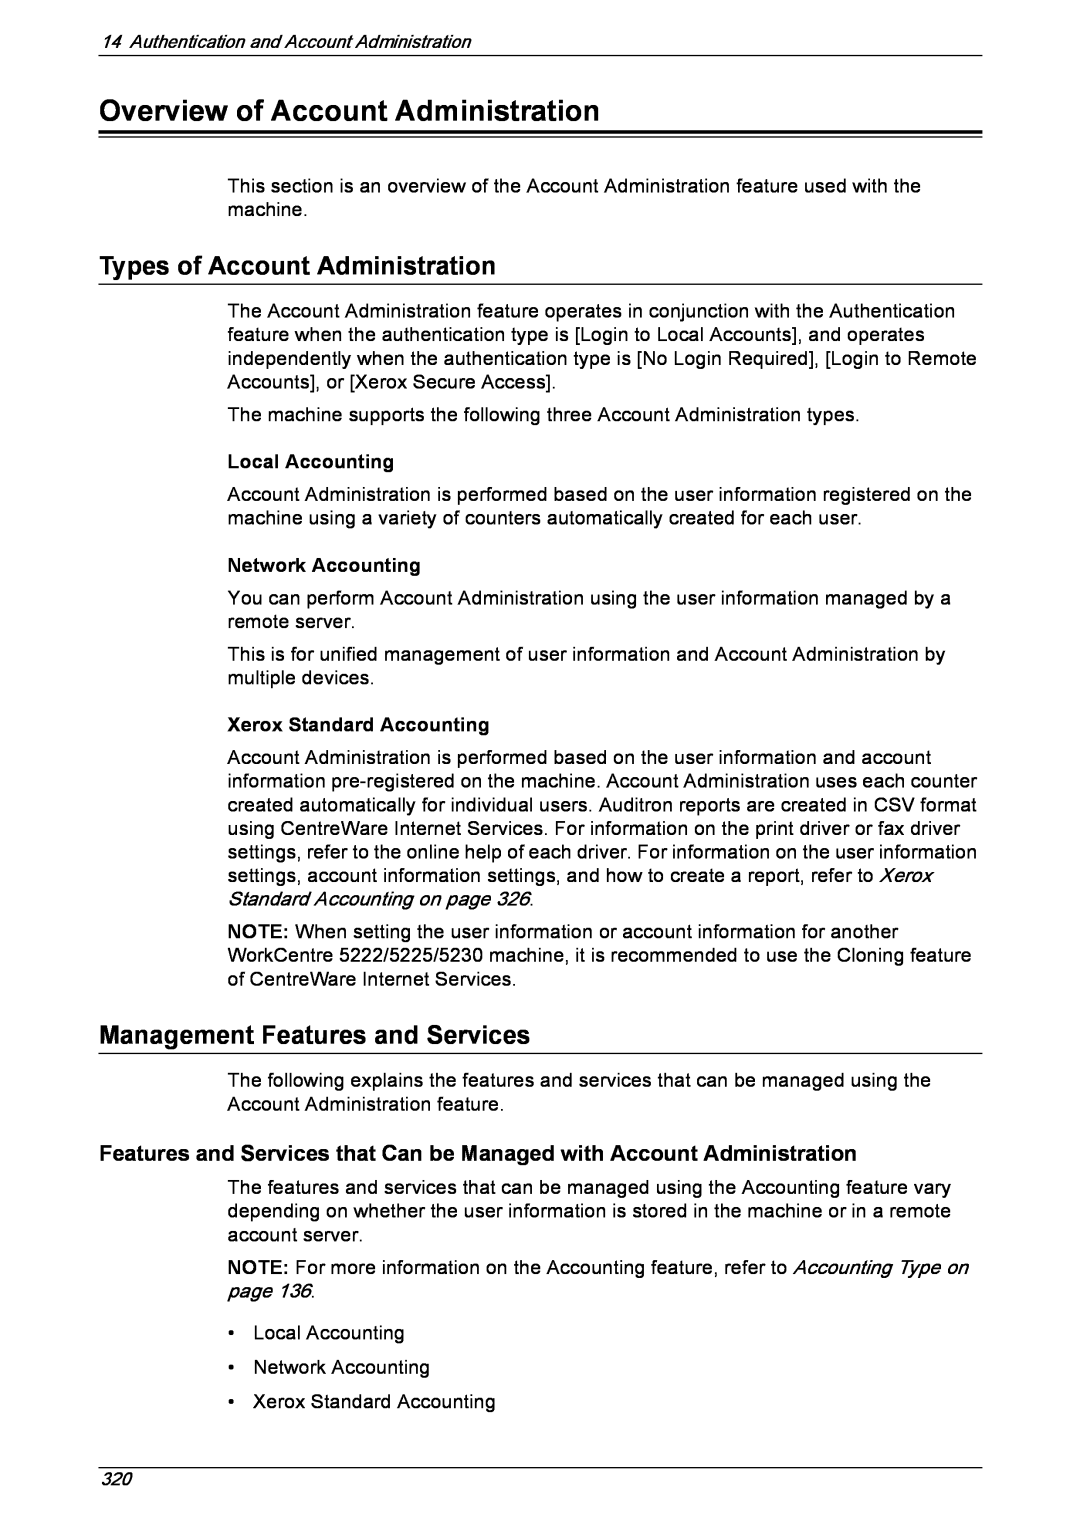 Xerox 5222 manual Overview of Account Administration, Types of Account Administration, Management Features and Services 